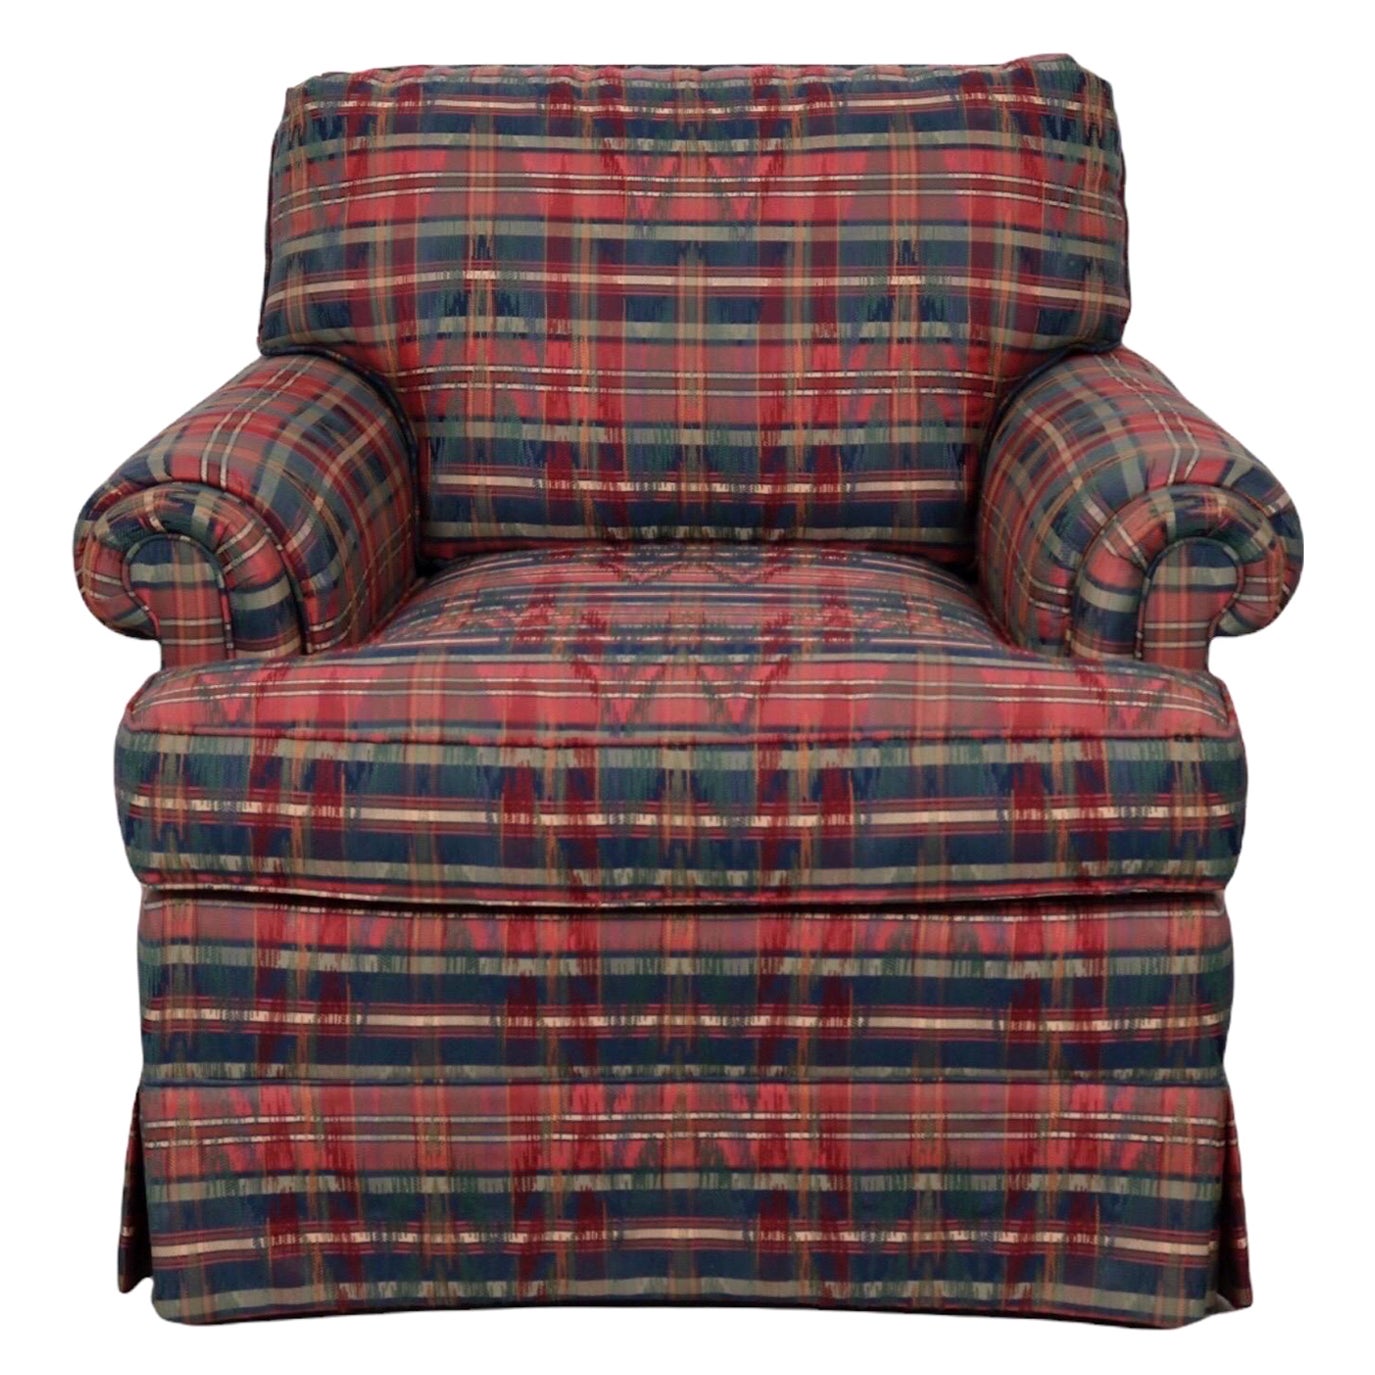 Wesley Hall Upholstered Armchair